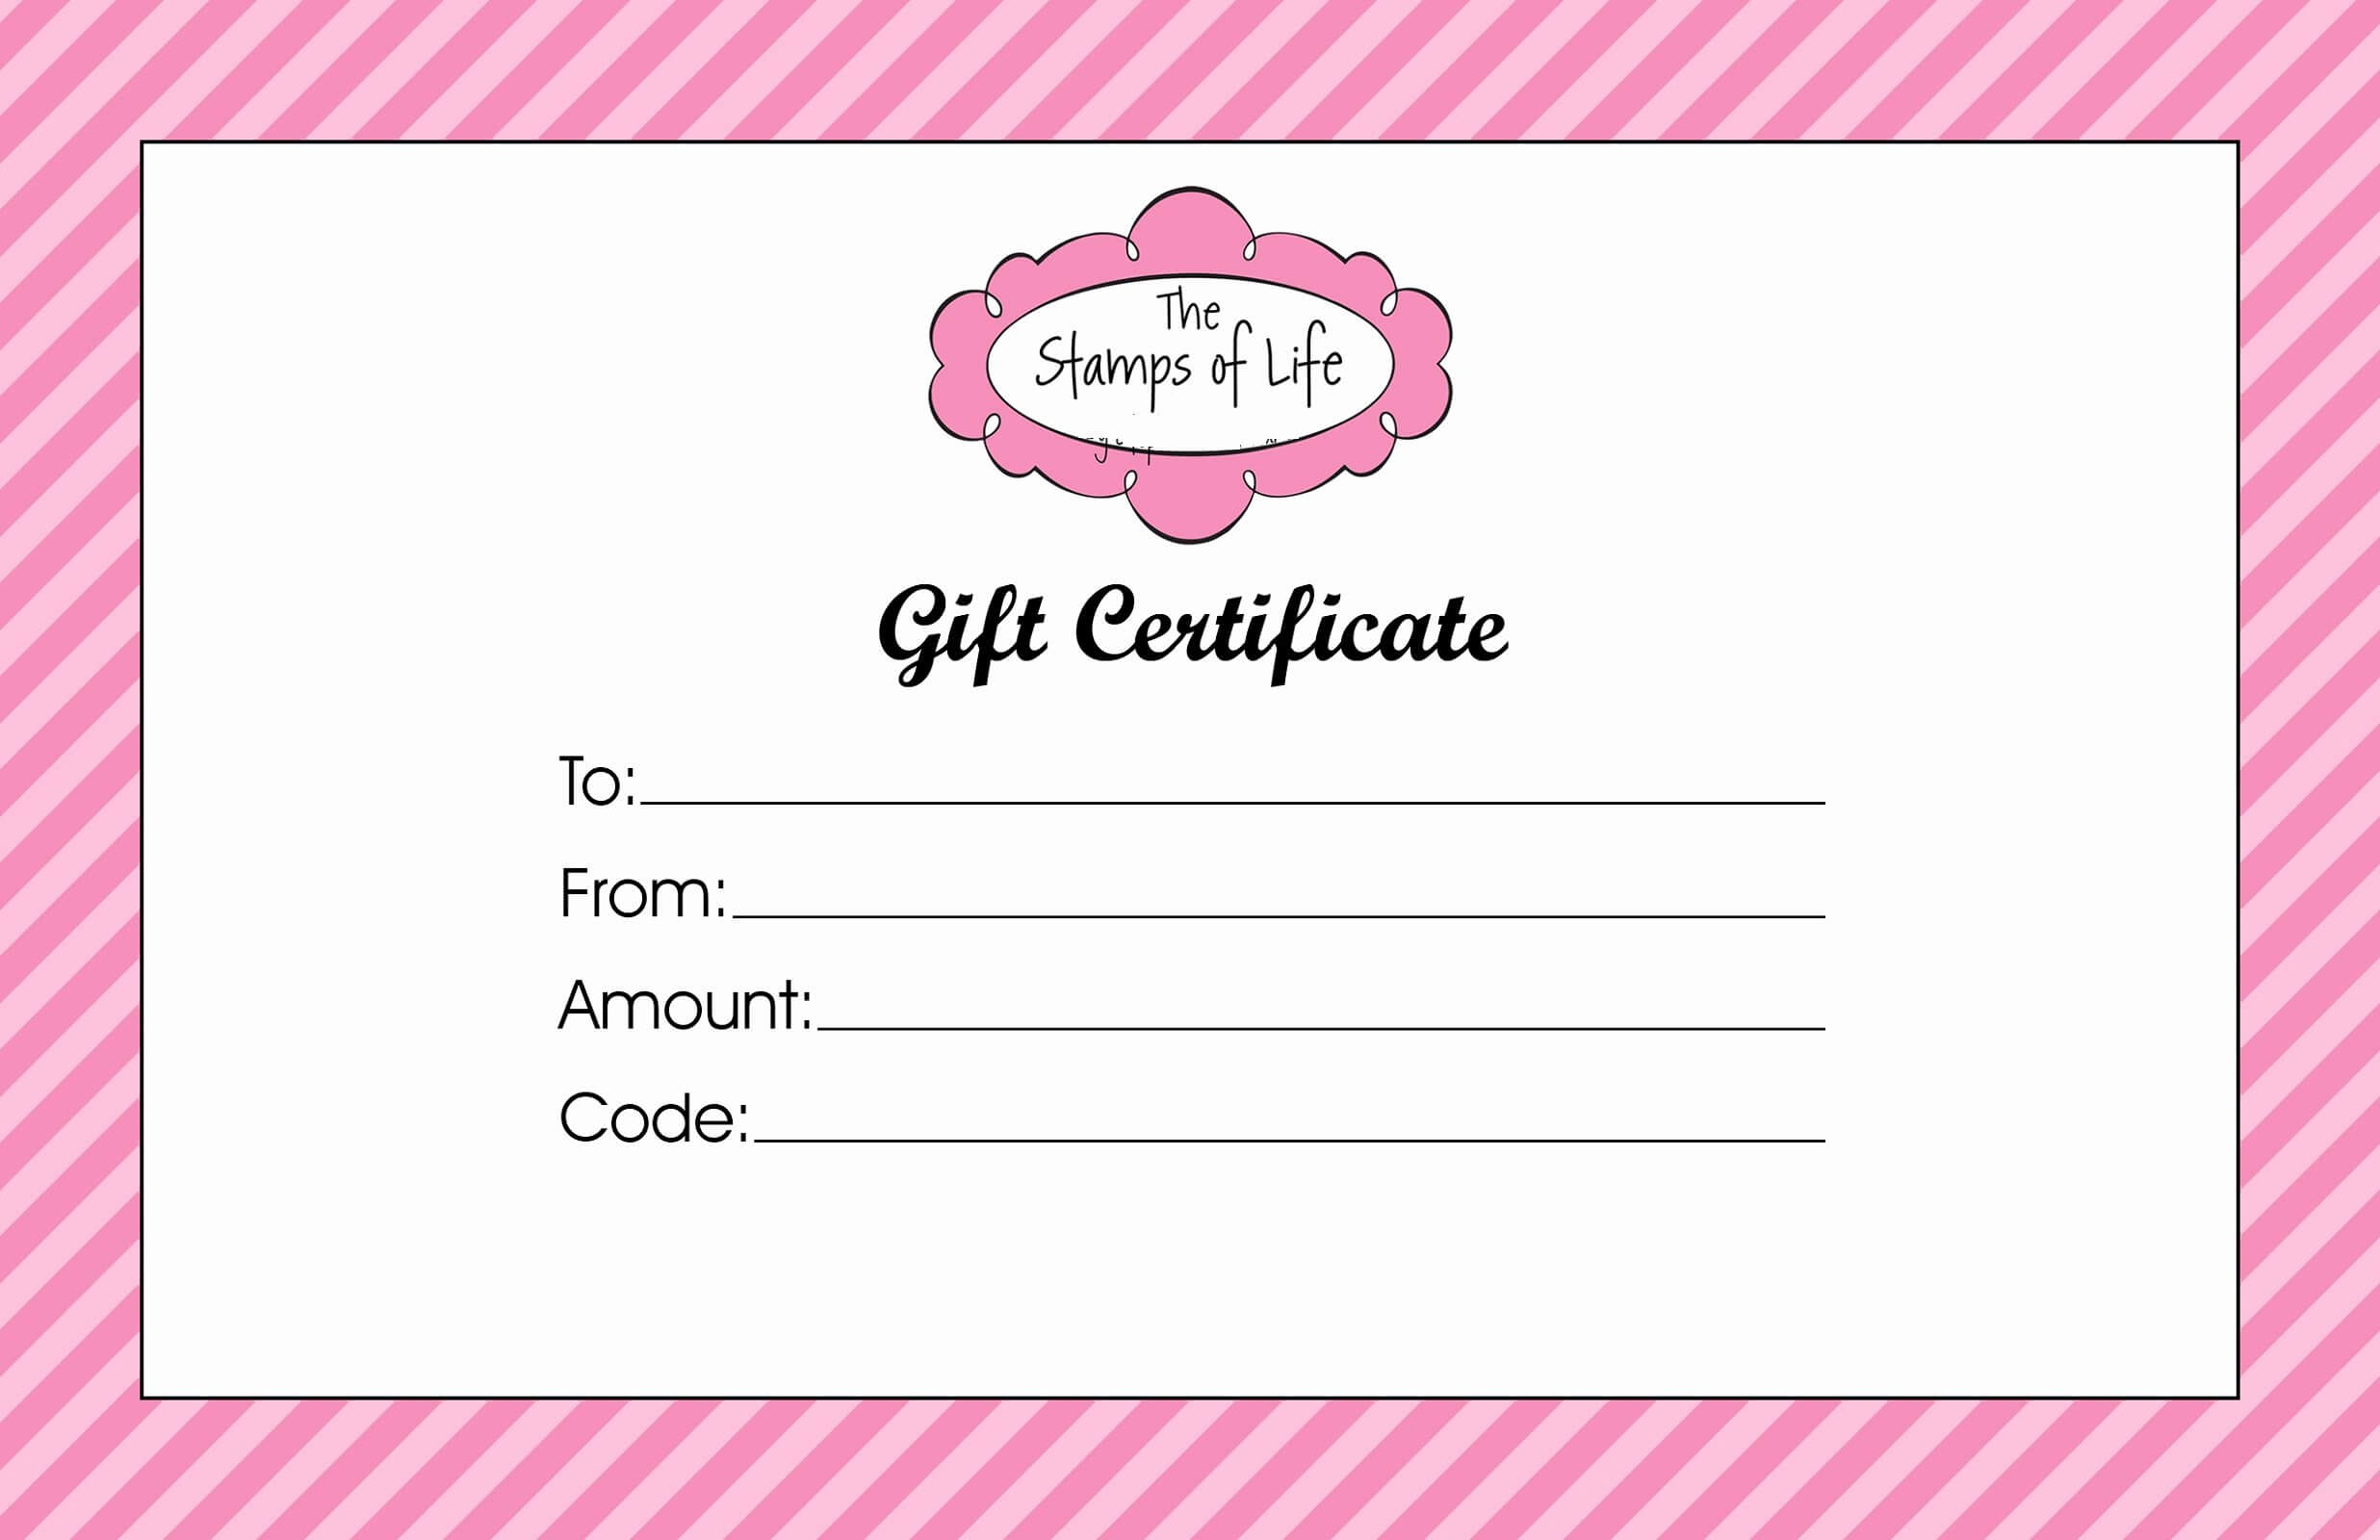 Gift Card Certificate Template Unique Gift Certificate Pertaining To Pink Gift Certificate Template